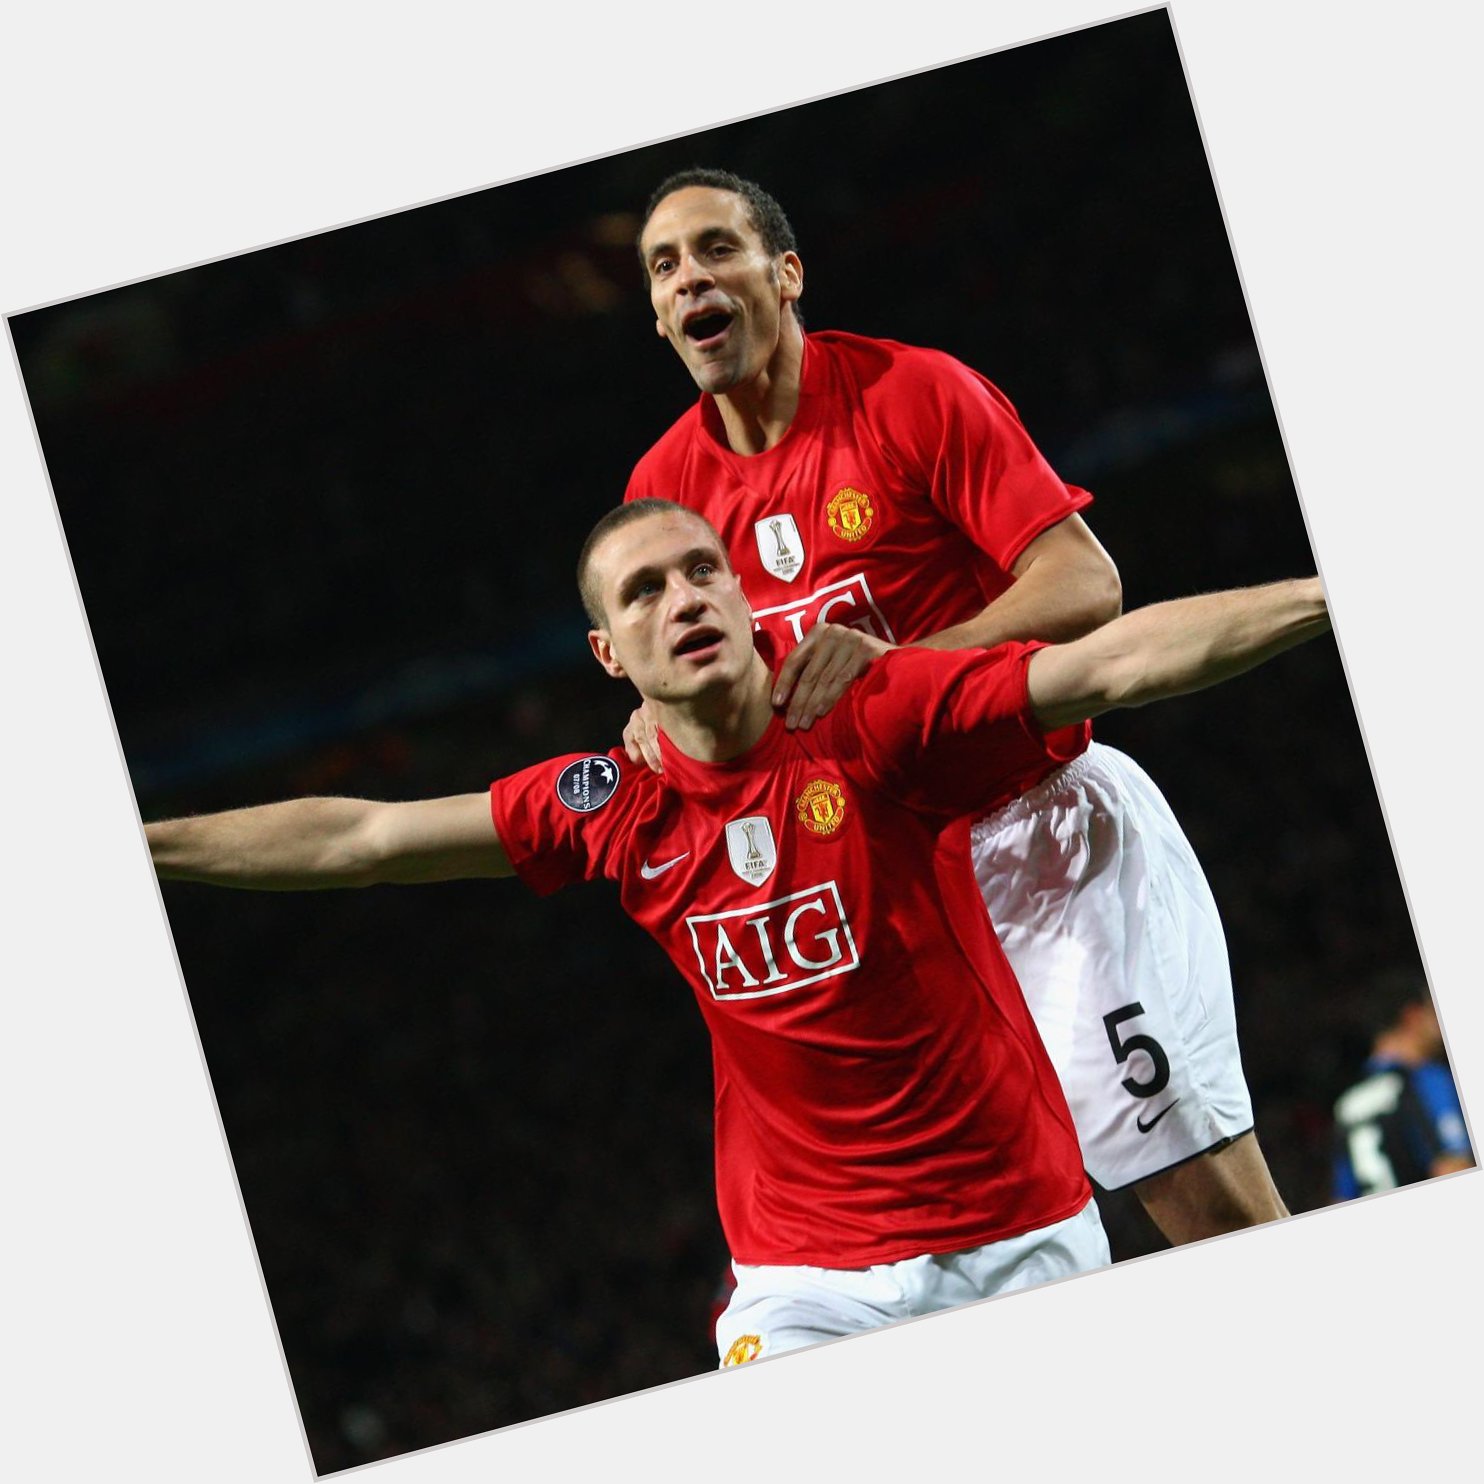 Happy Birthday Nemanja Vidic   Name a better defensive duo than these two

We ll wait 